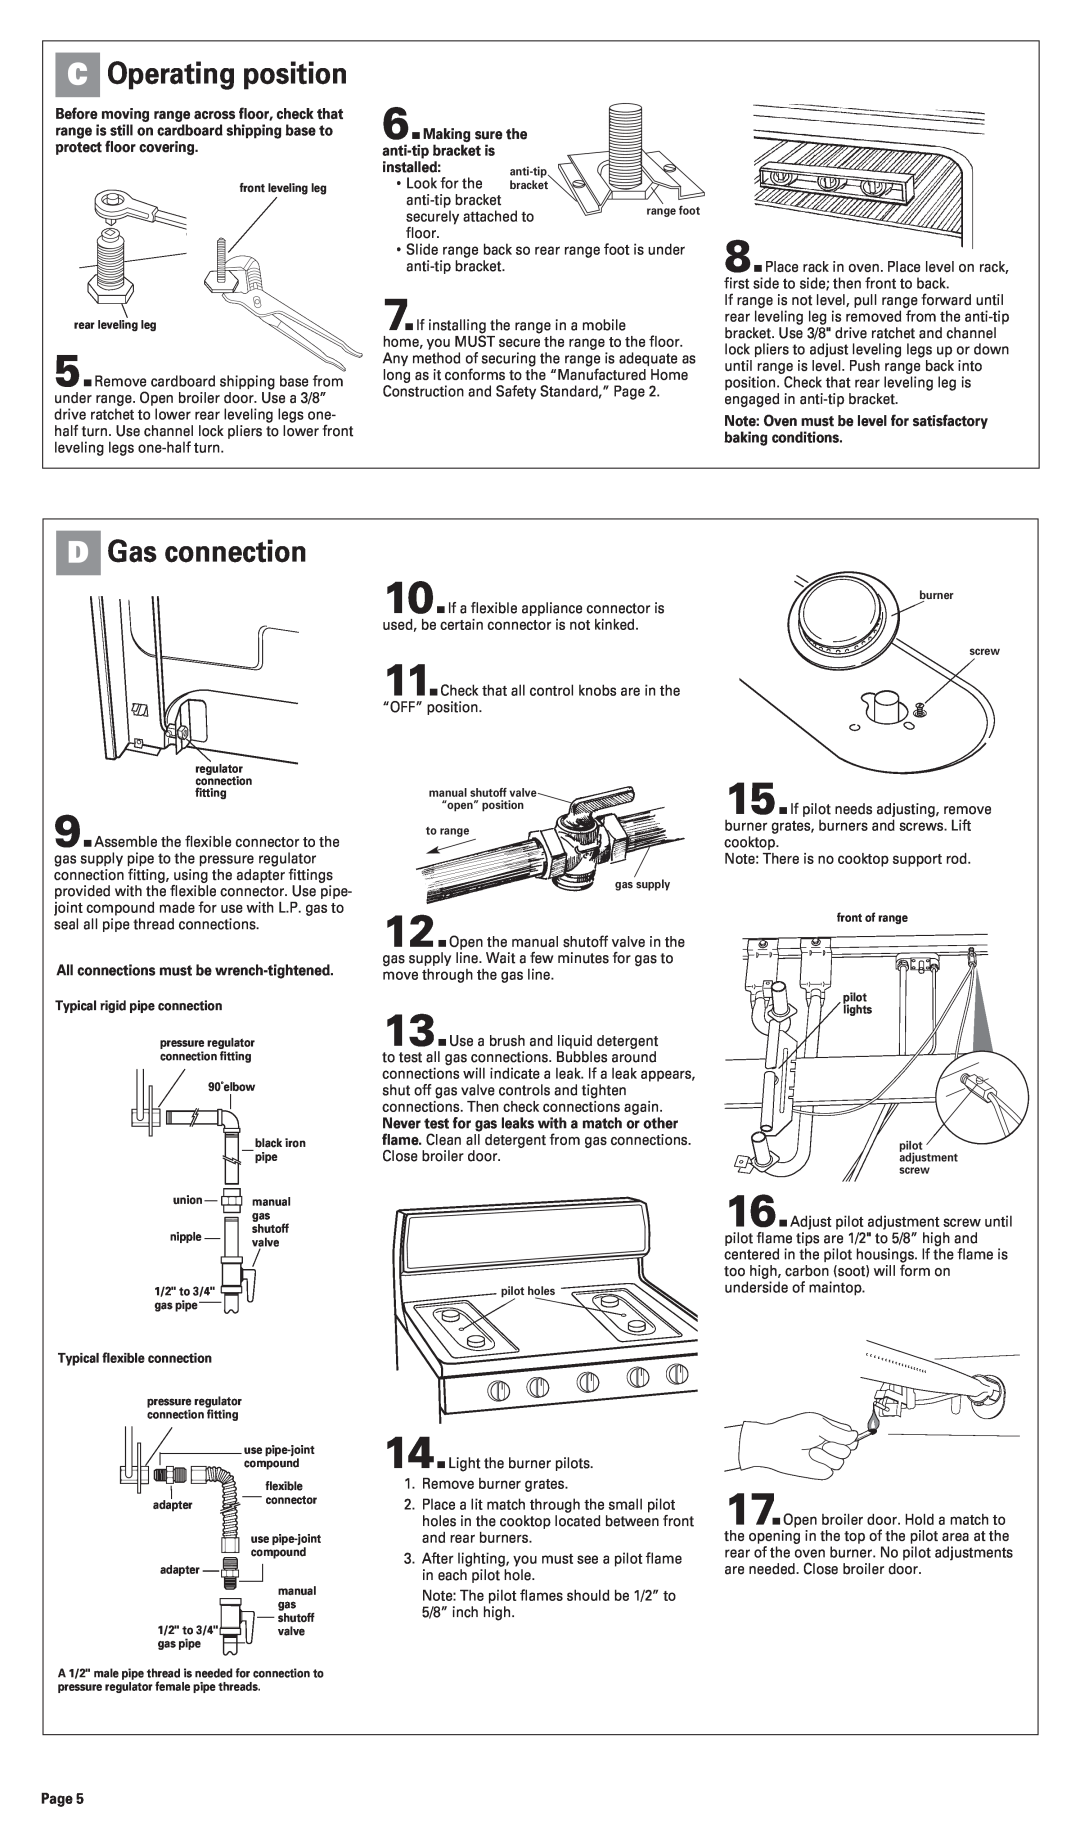 Whirlpool FGP300JN0 installation instructions DGas connection, COperating position 